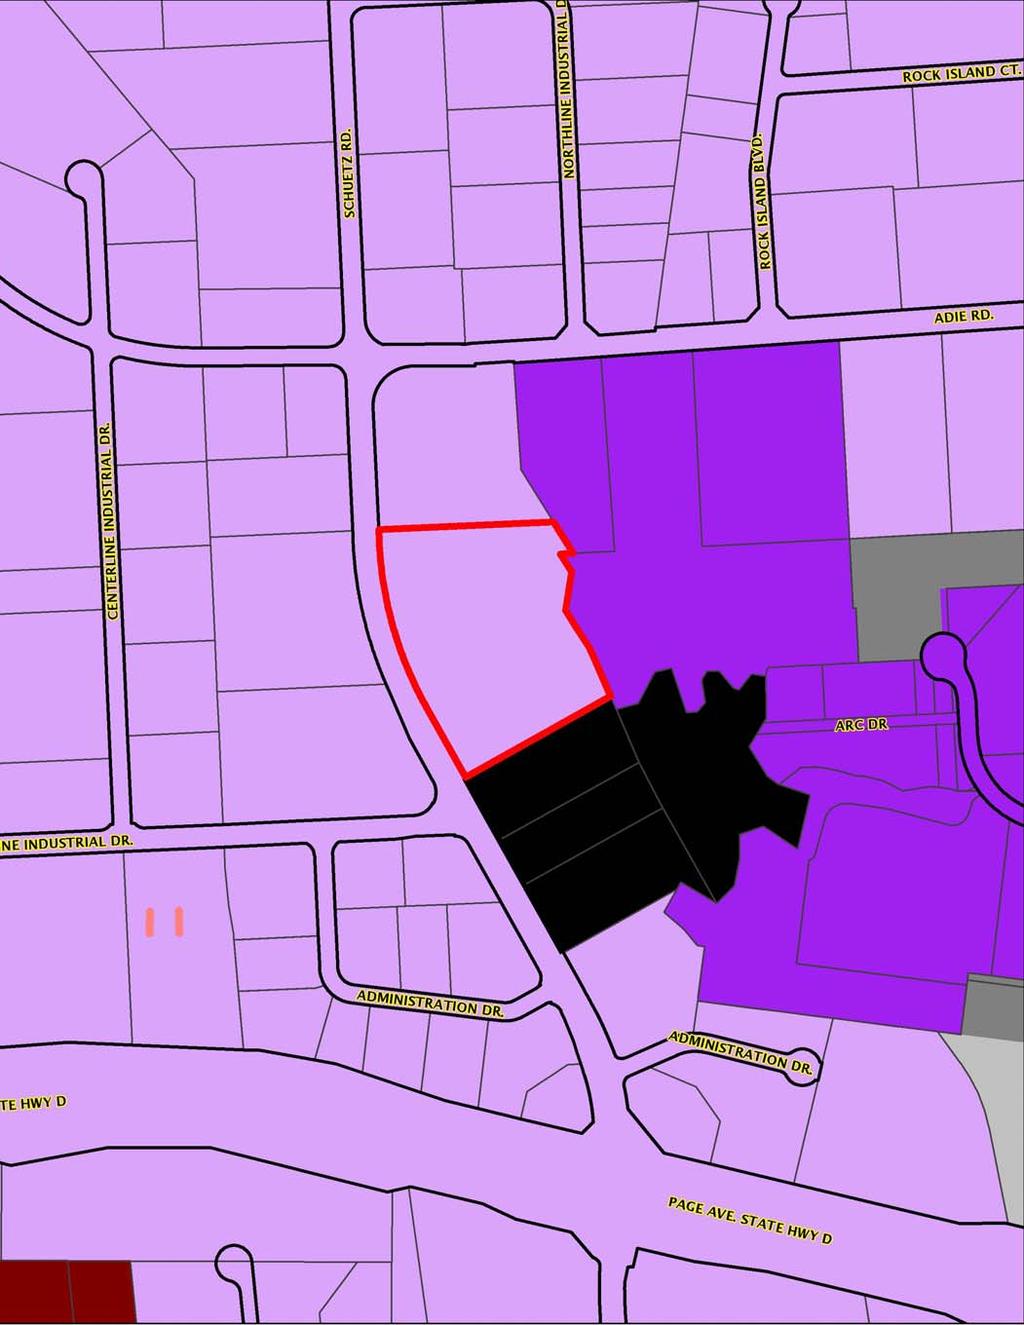 M-1 PDM PDO FIGURE 3: ZONING MAP PAGE 10